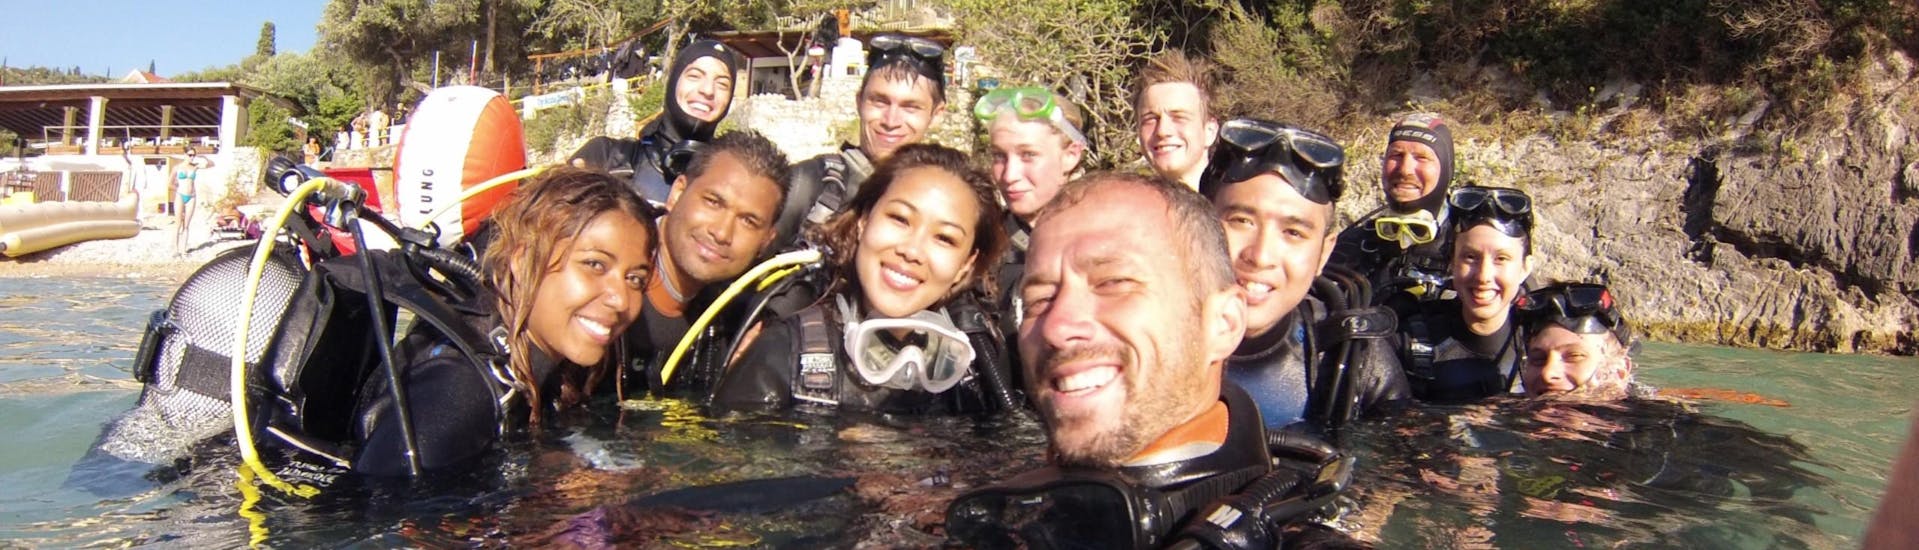 A diving instructor from Achilleon Diving Center Corfu is taking a selfie with a group of people taking part in the Guided Boat Dives from Paleokastritsa for Certified Divers.